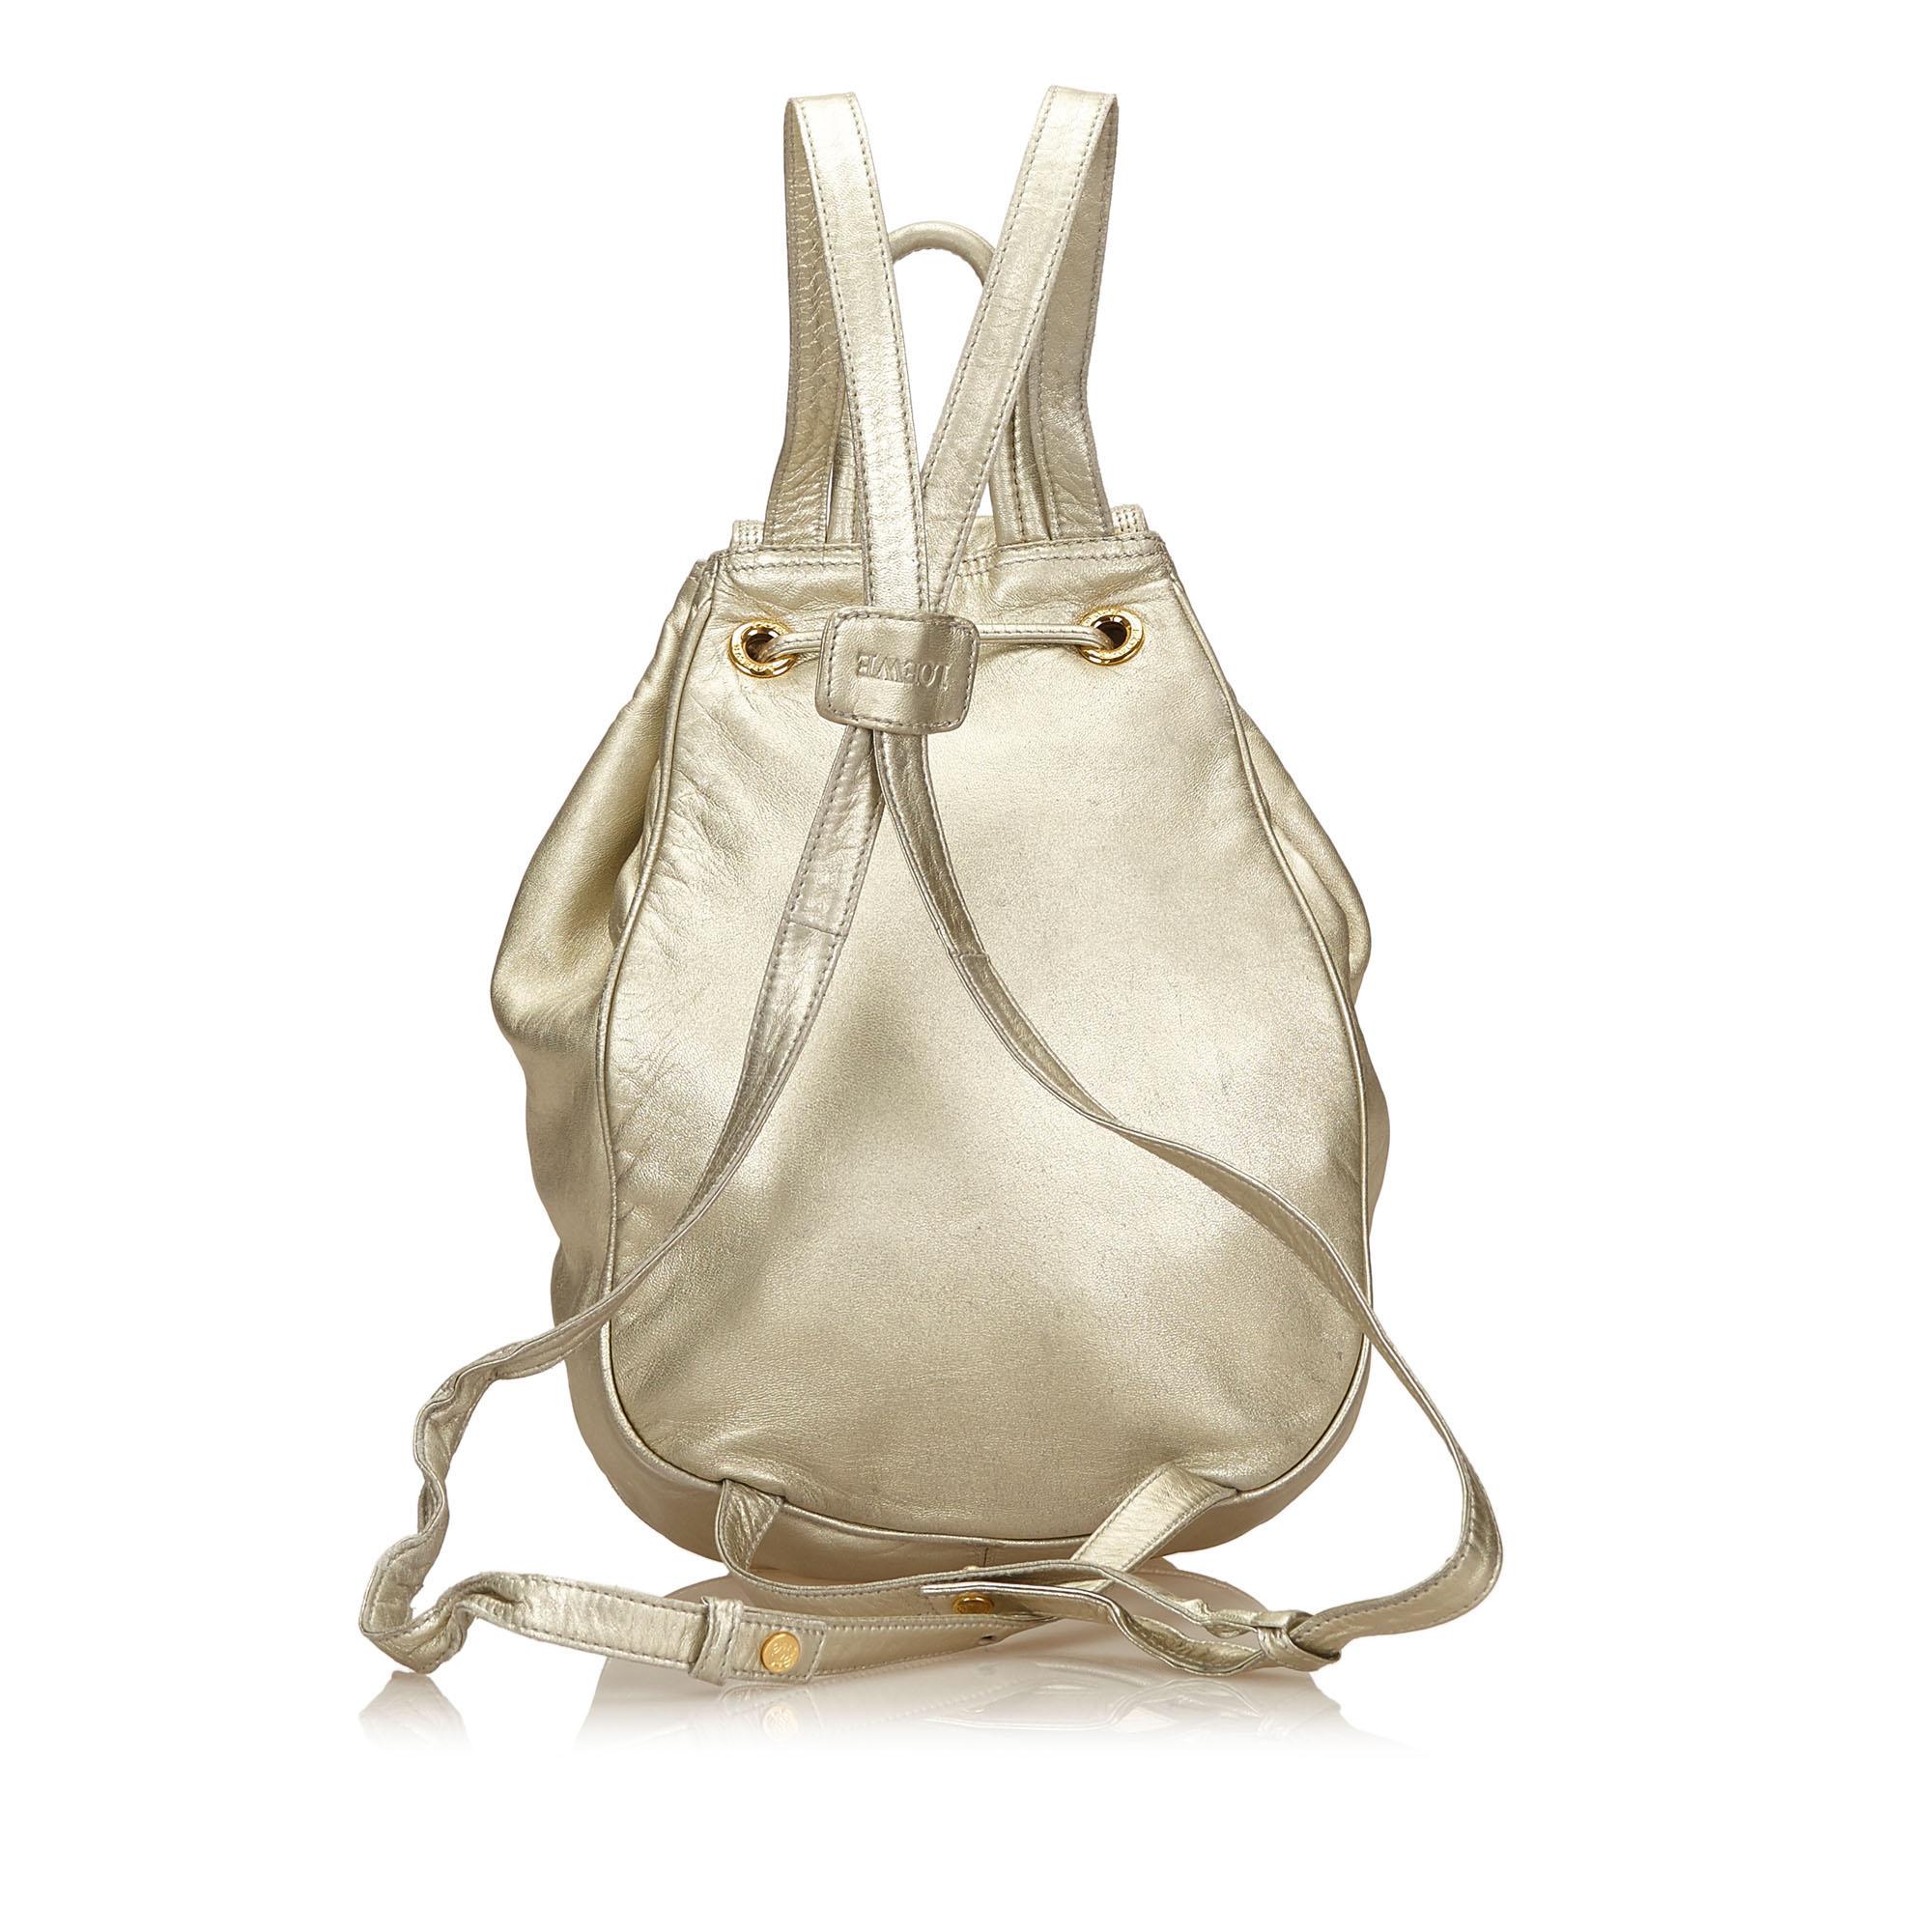 Vintage Authentic Loewe Gold Leather Metallic Backpack Spain MEDIUM  In Good Condition For Sale In Orlando, FL